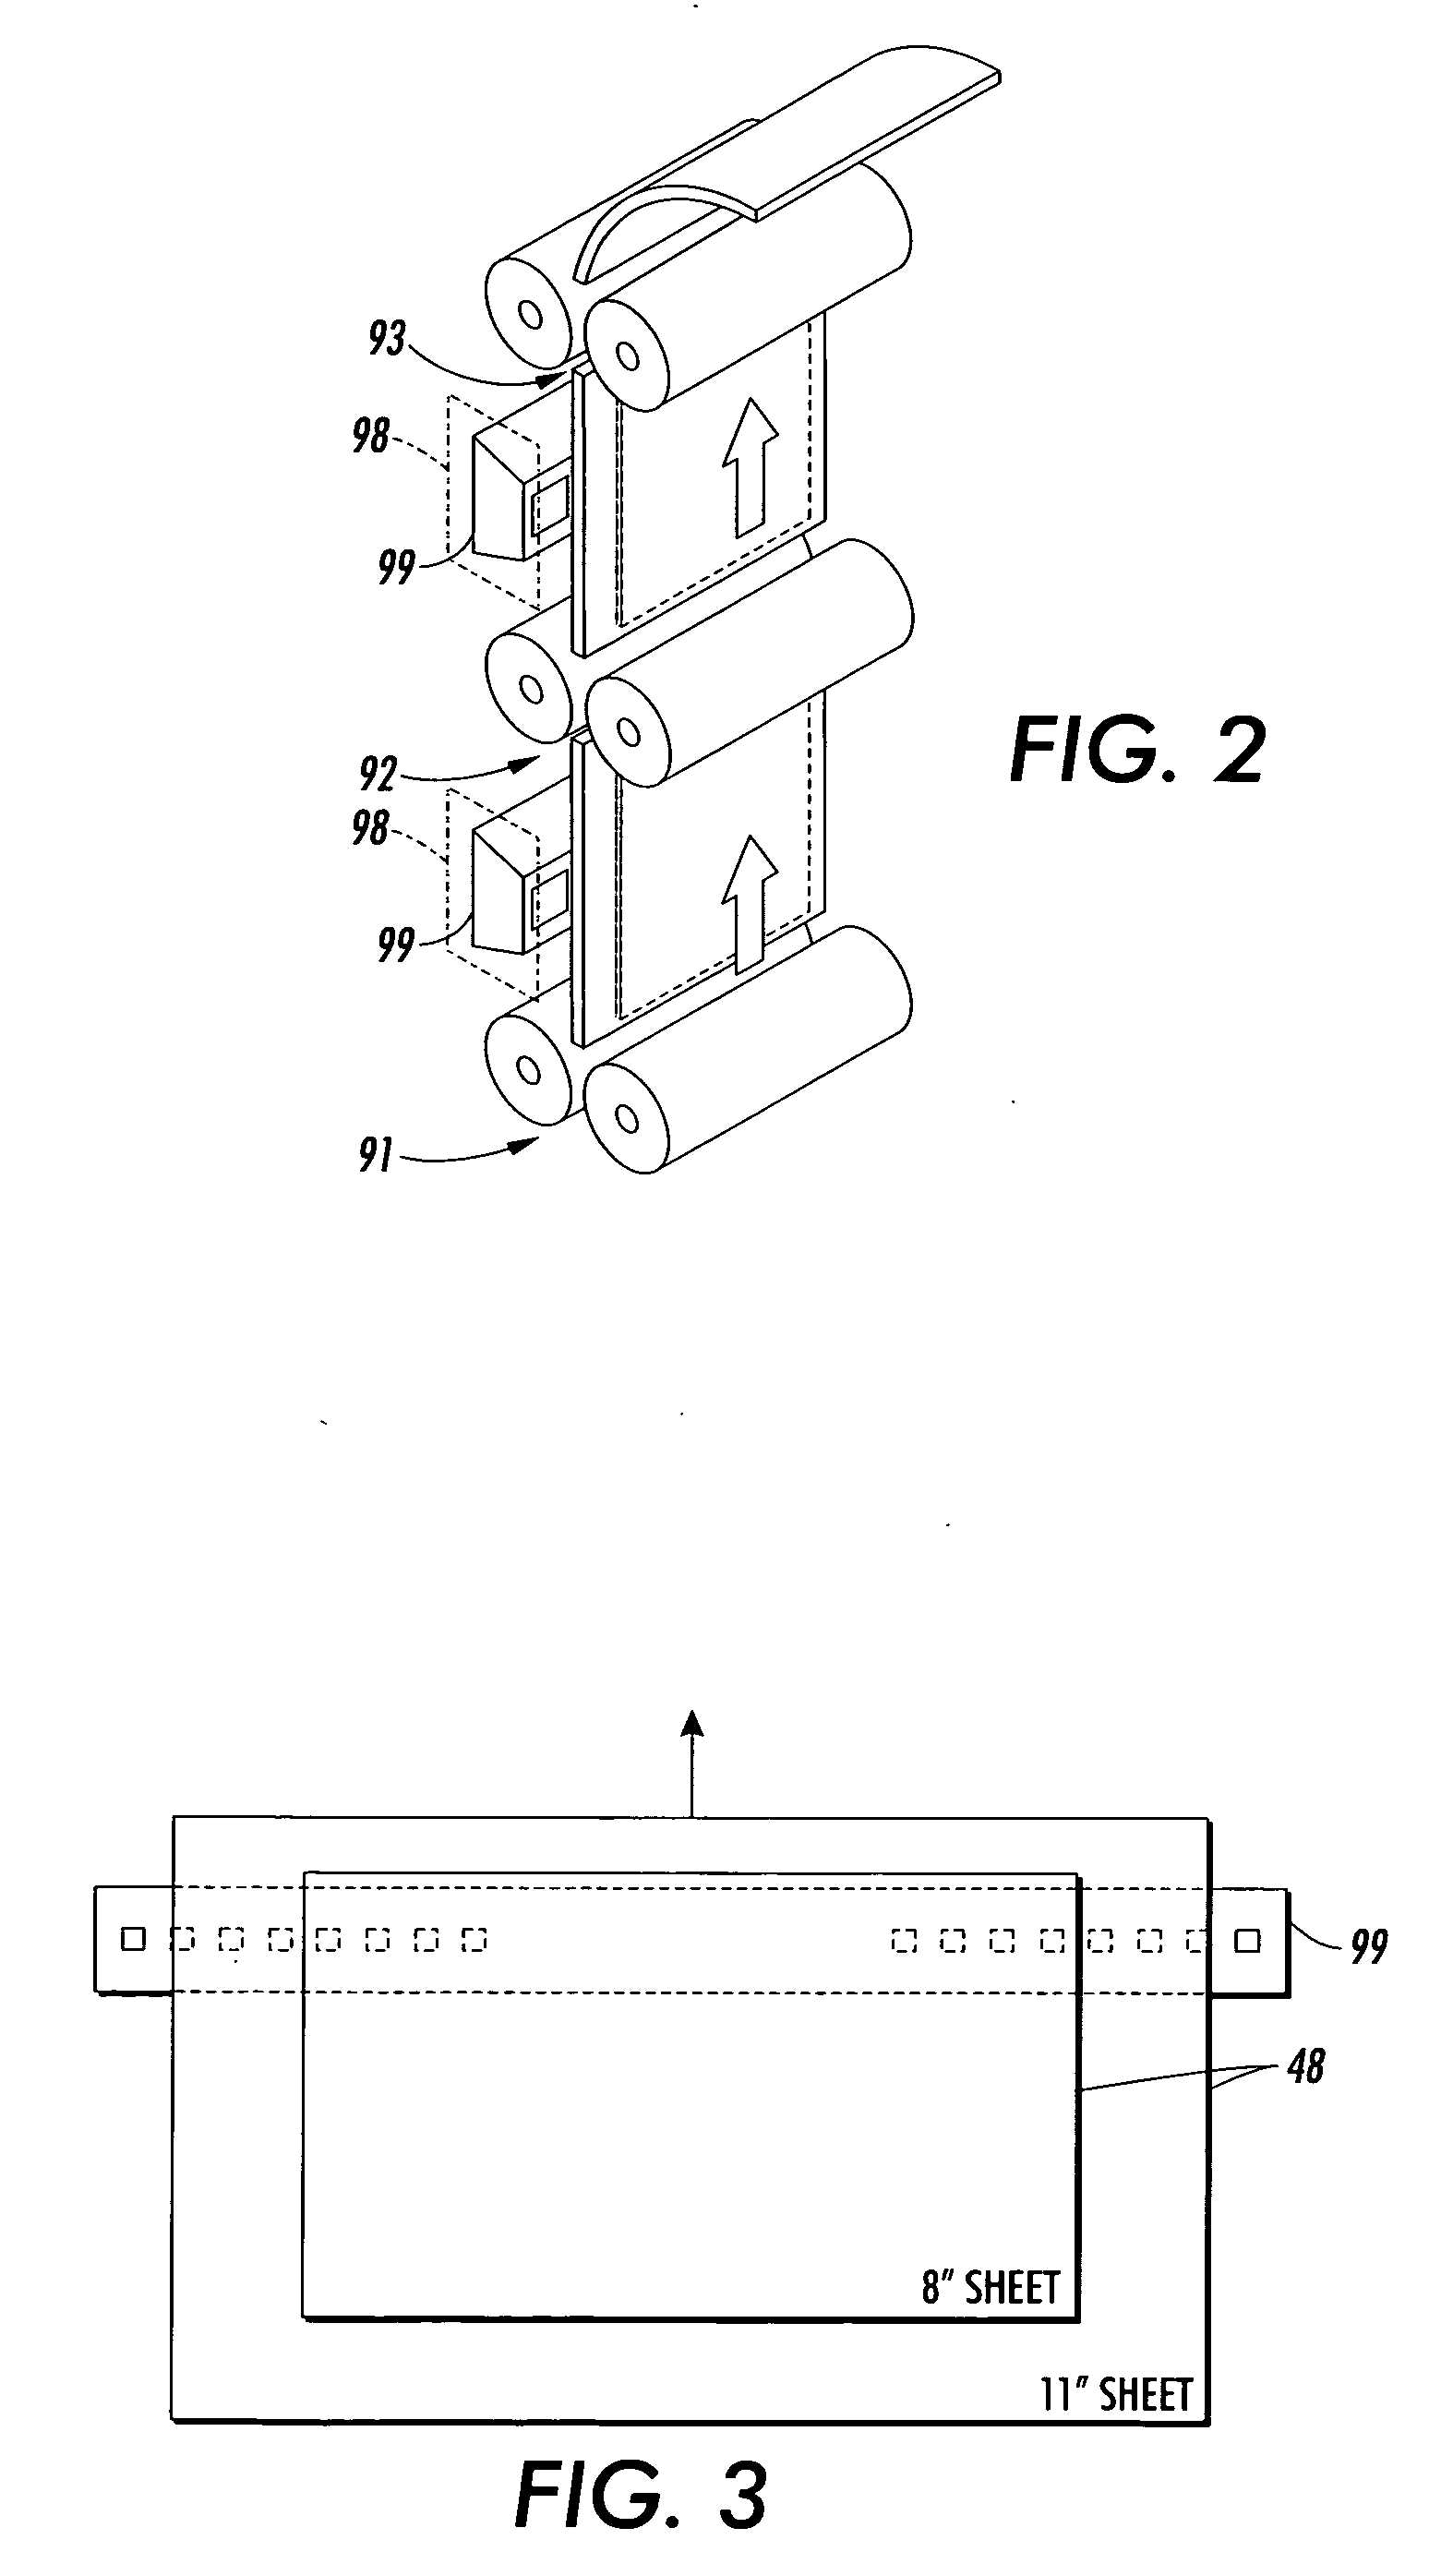 Paper path calibration and diagnostic system